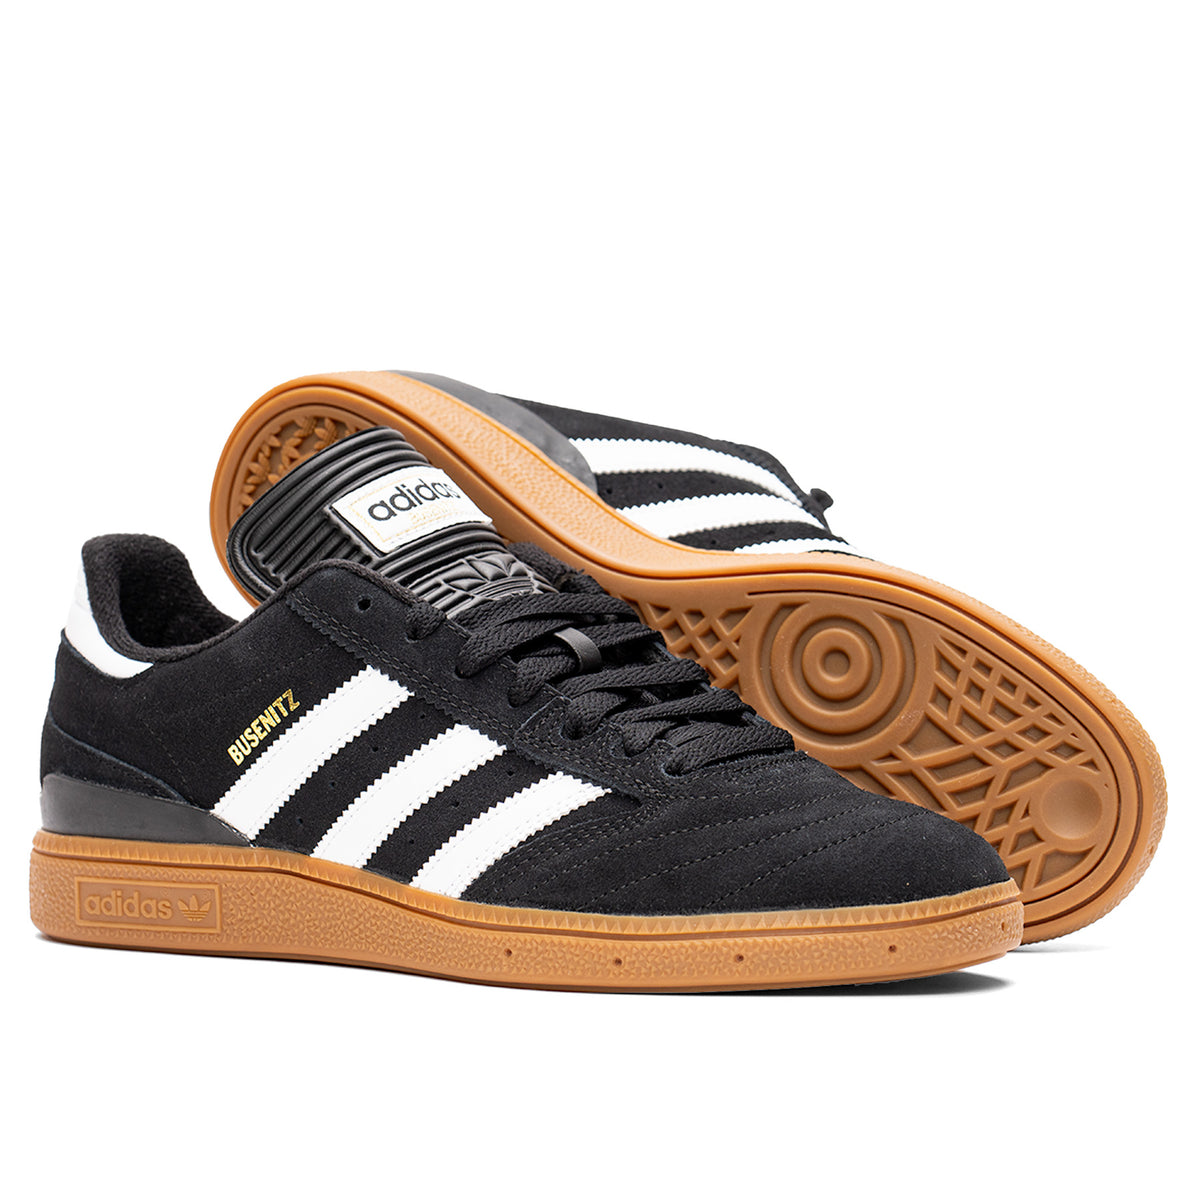 Adidas - Busenitz - Black suede shoe with white stripes and brown gum sole